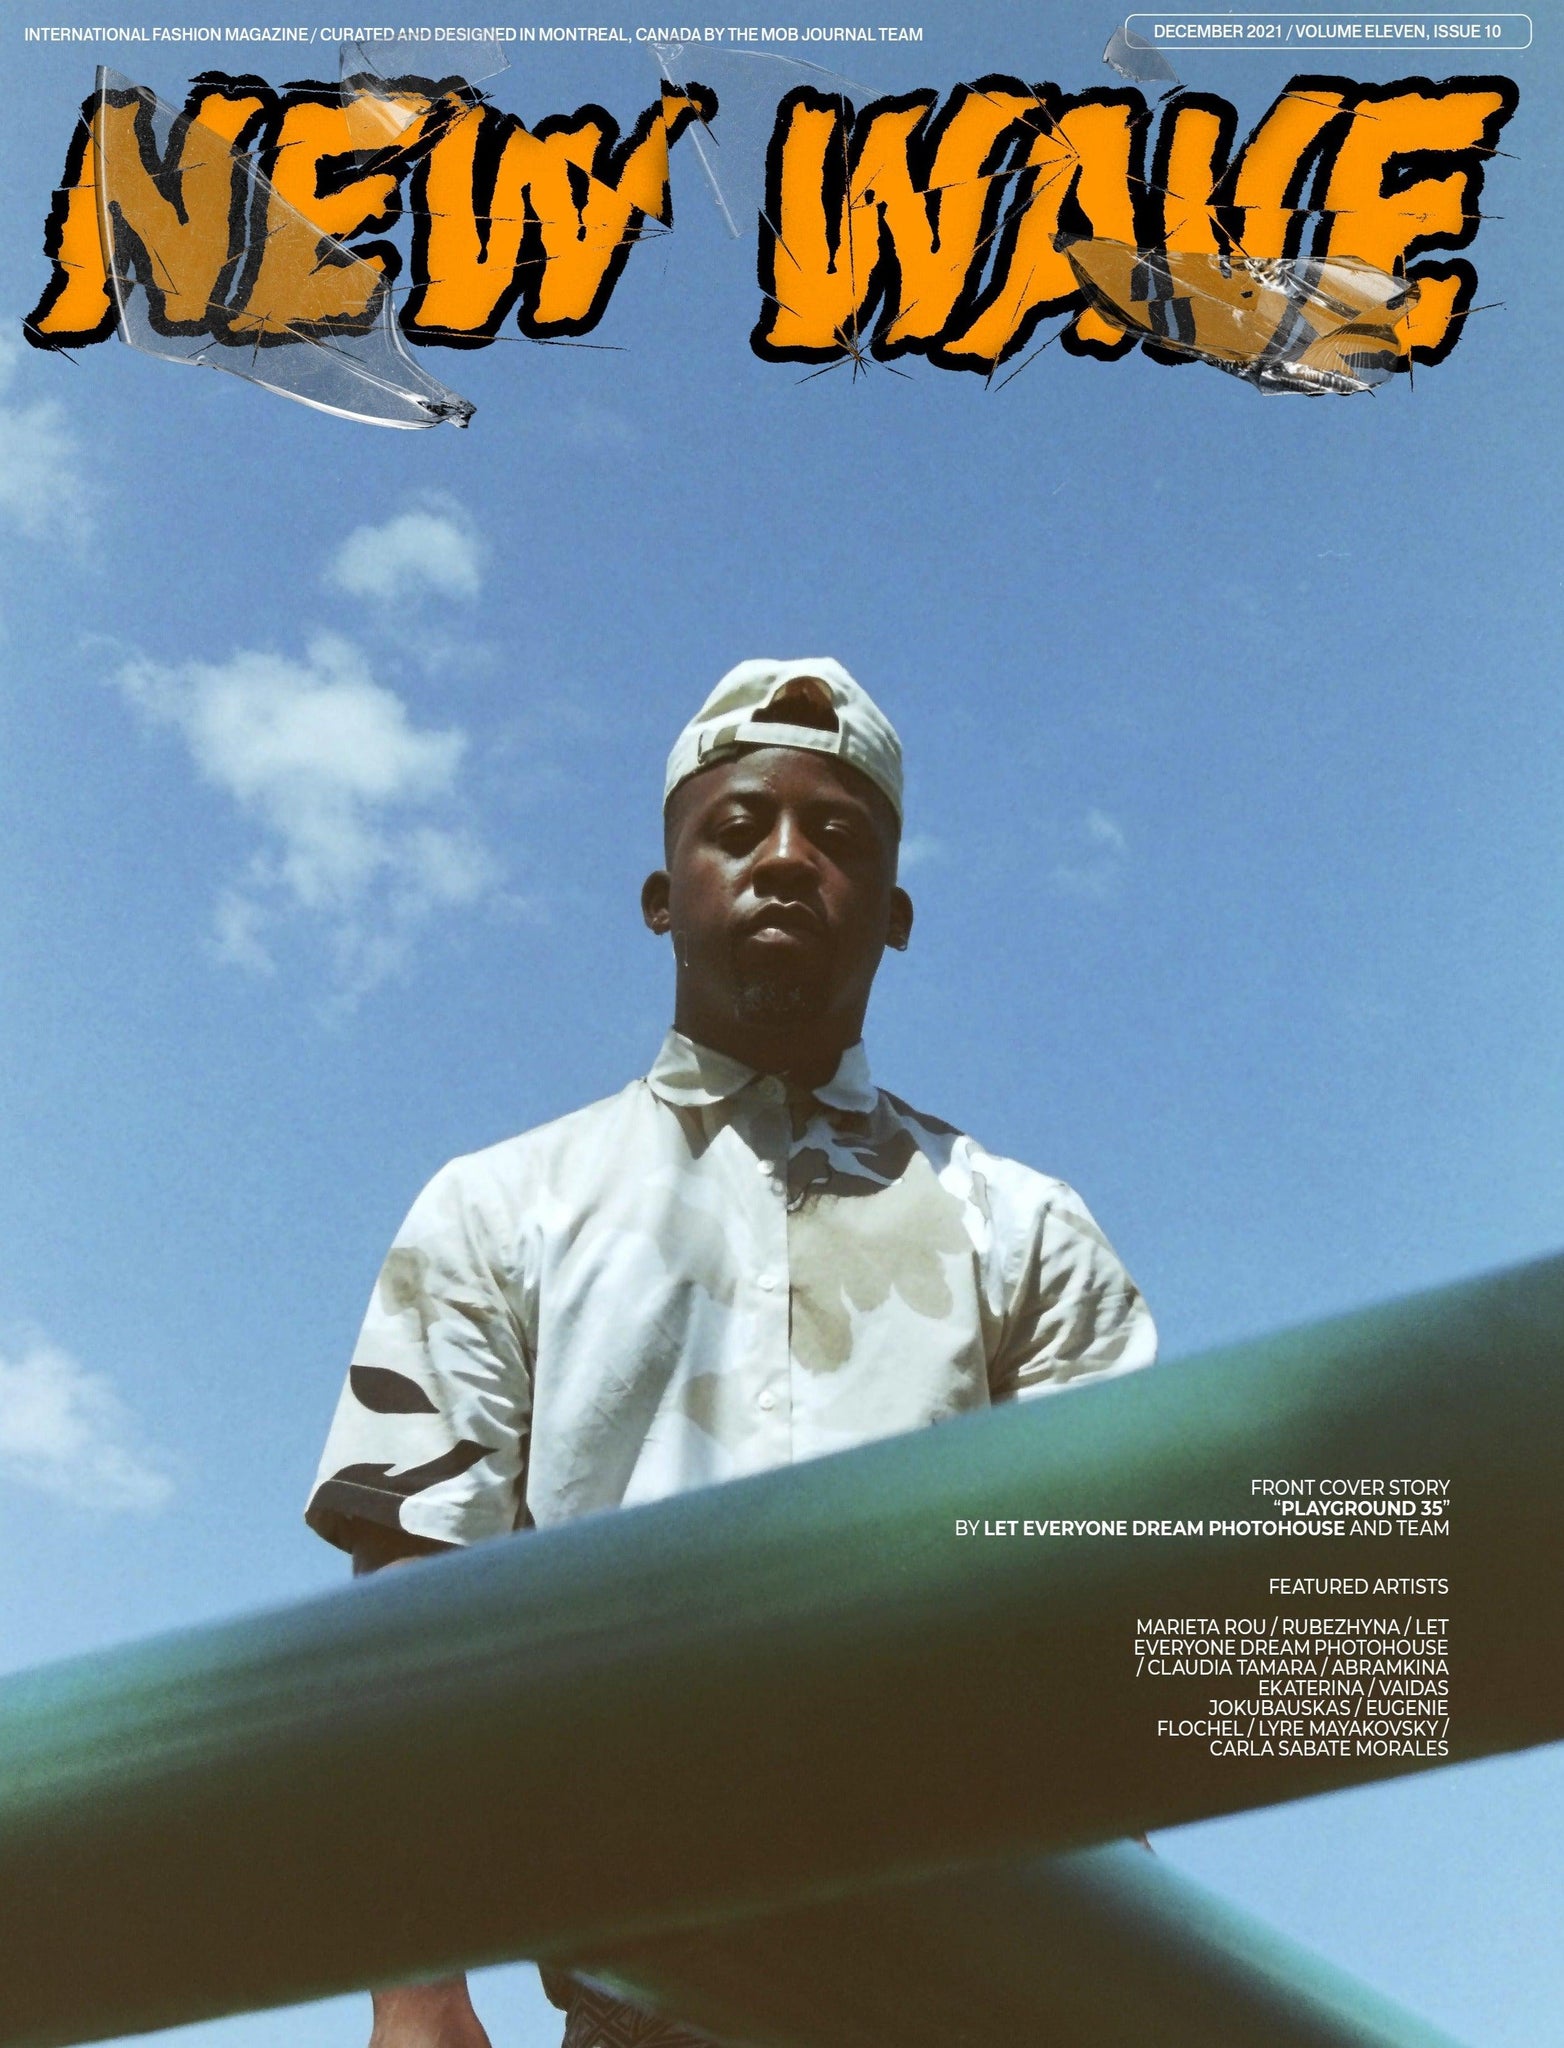 NEW WAVE | VOLUME ELEVEN | ISSUE #10 - Mob Journal